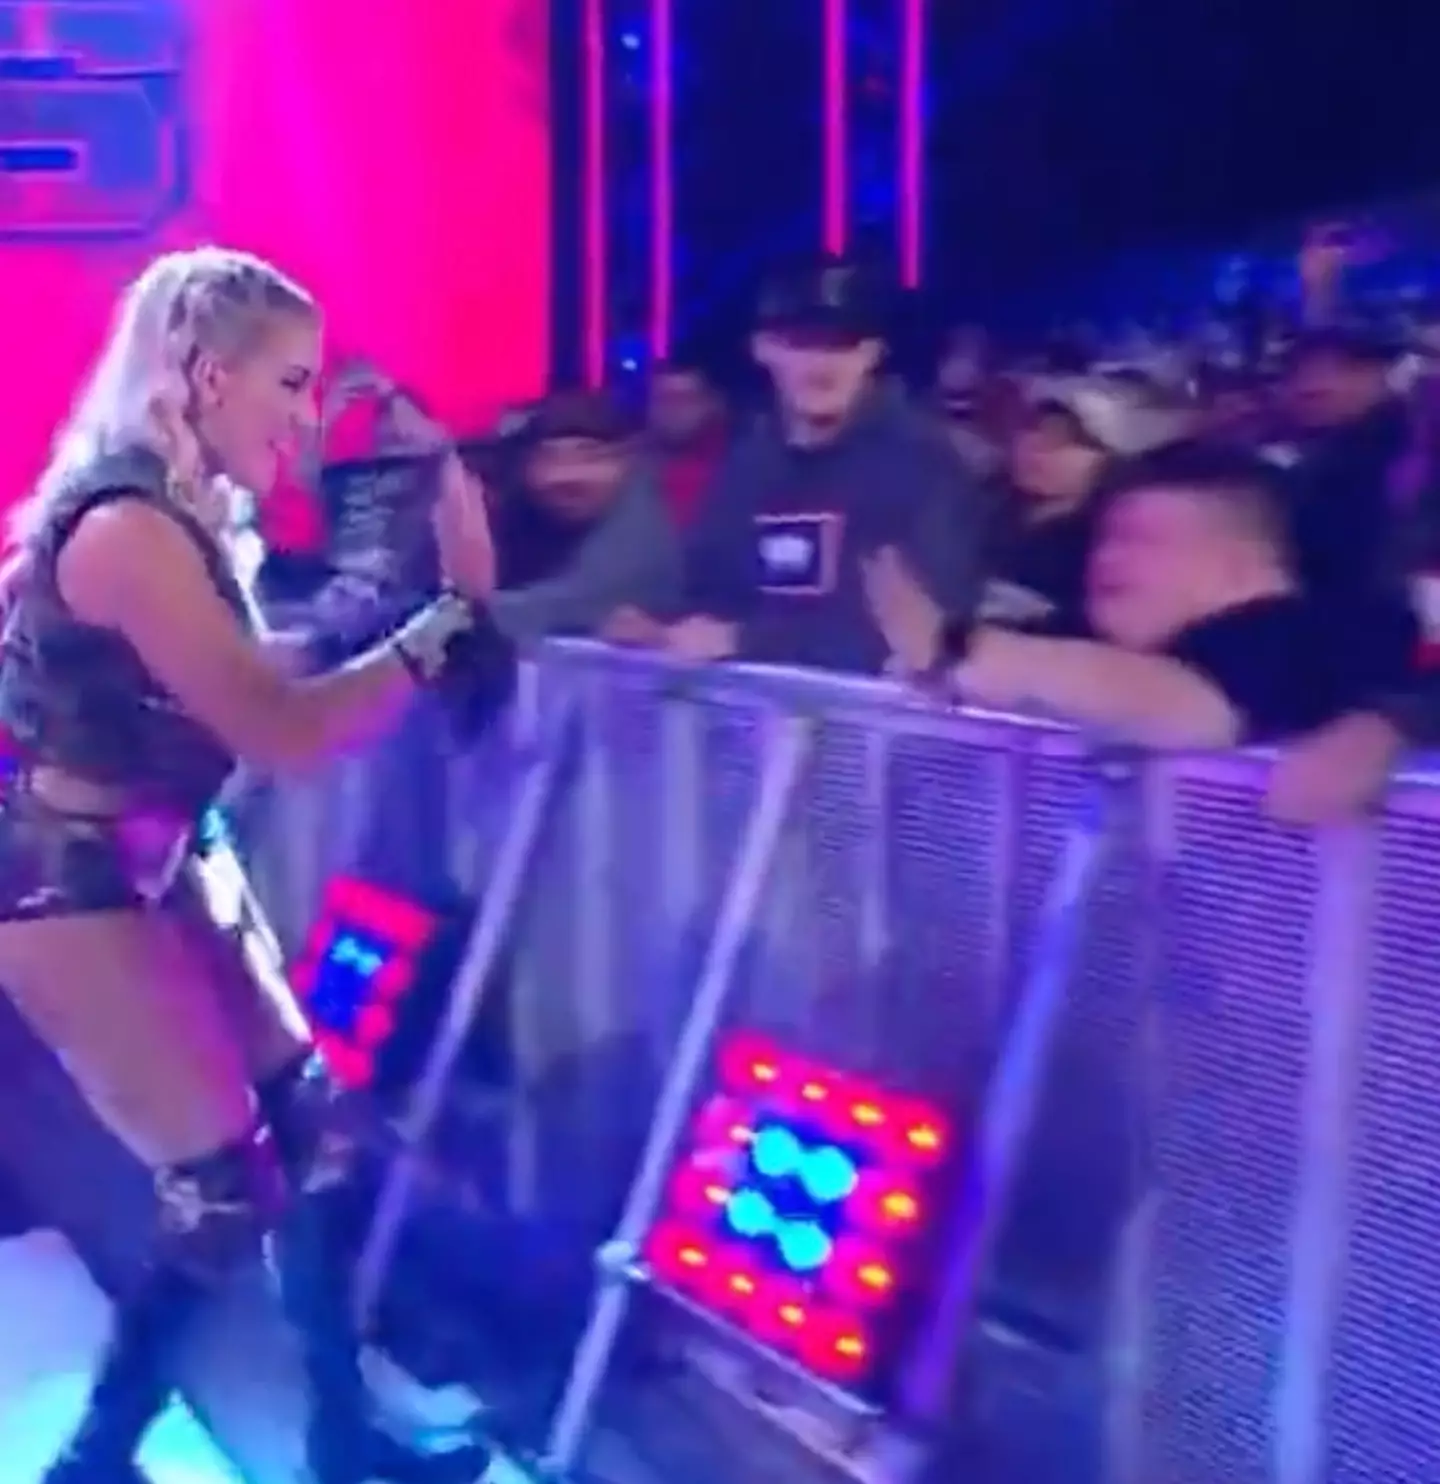 Lacey Evans went to give the fan a high five.